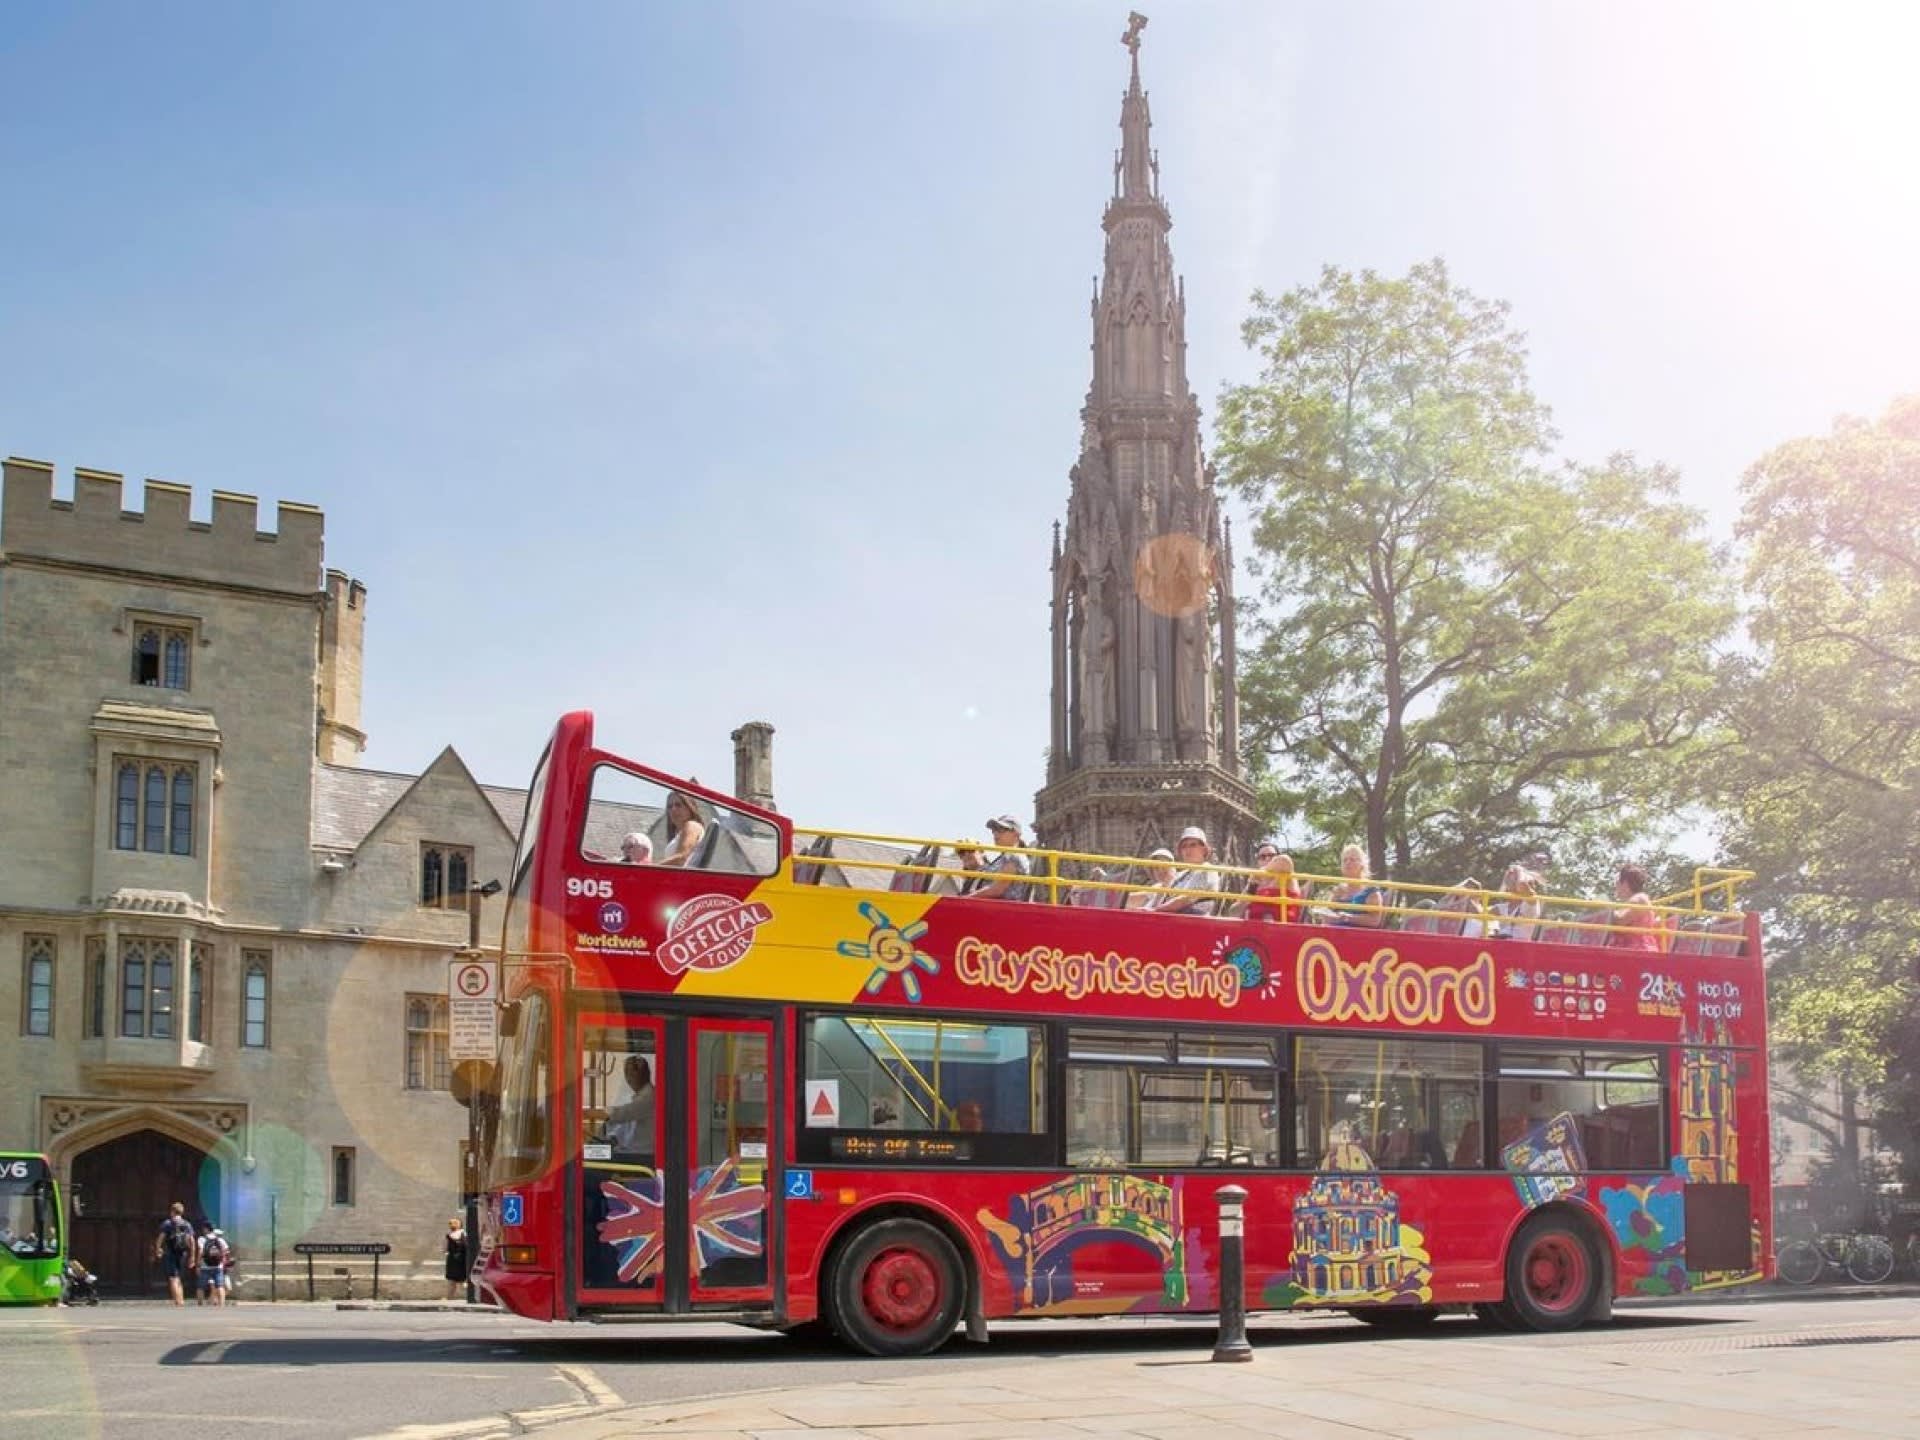 Panorama & Hop On Hop Off Bus Oxford 48 hours Ticket